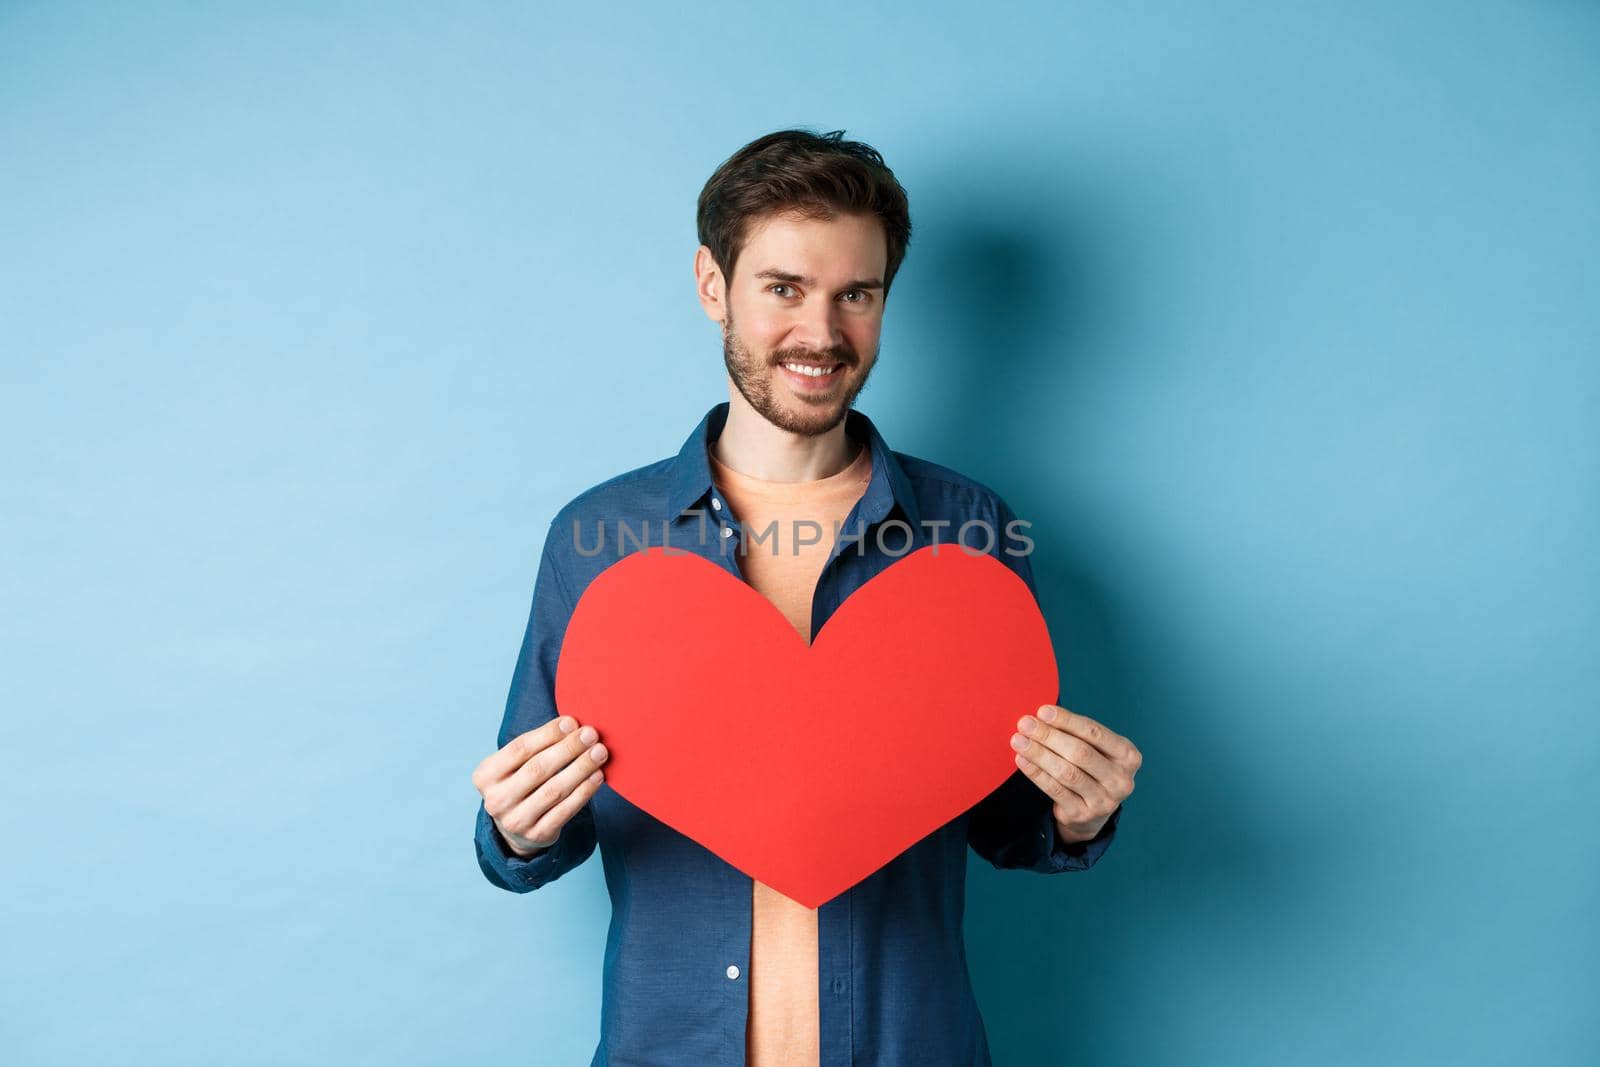 Handsome young man smiling, showing big red heart postcard for Valentines day, looking at camera happy, standing against blue background.